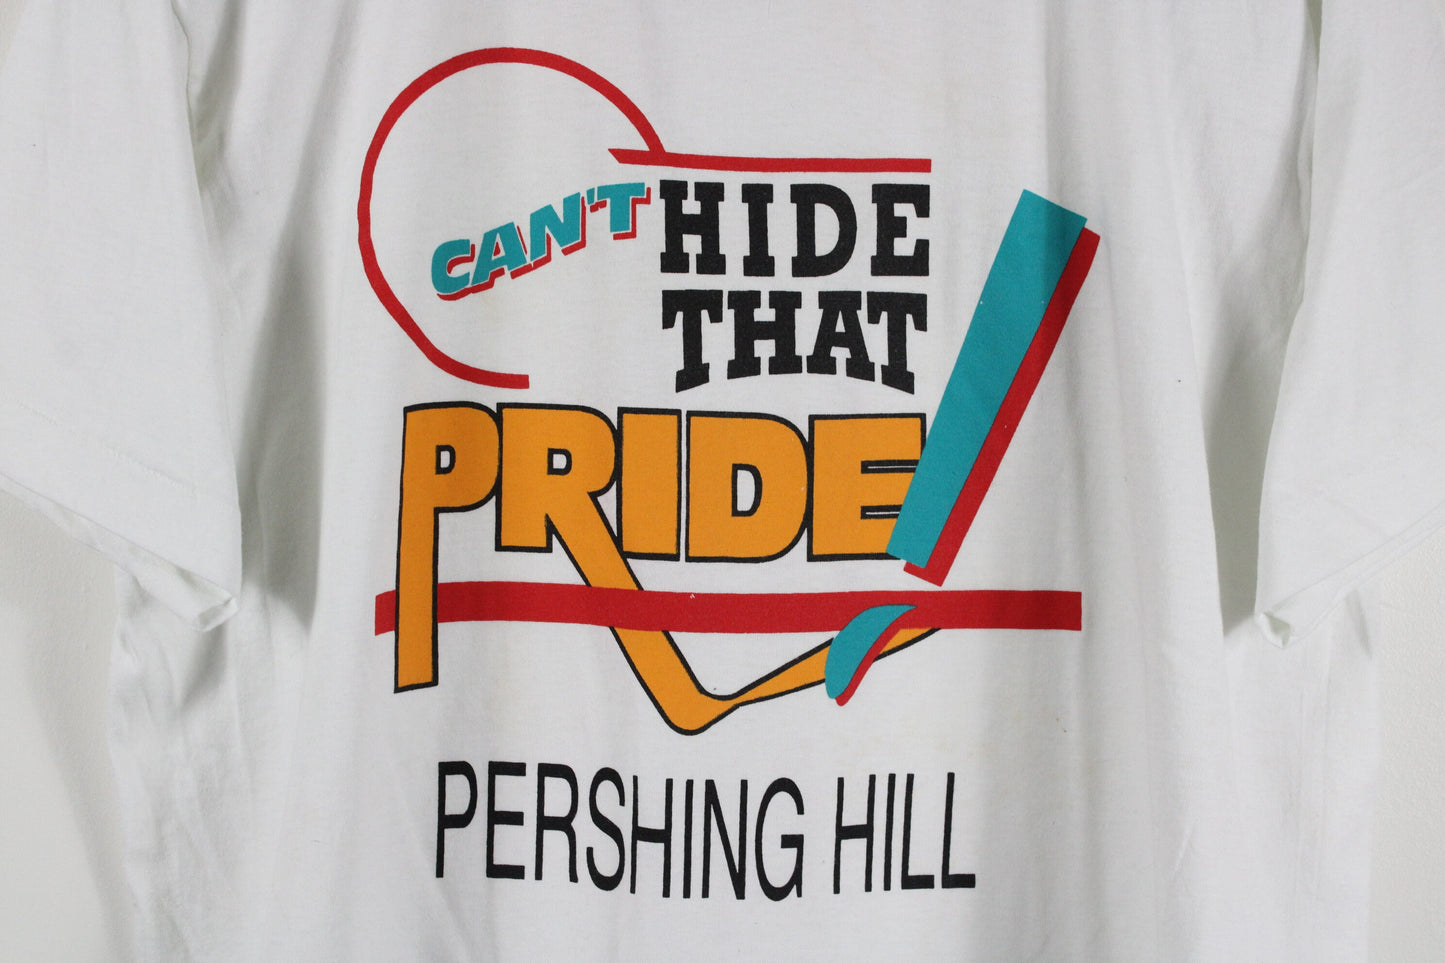 Pride T-Shirt / Vintage Can't Hide That Pride Pershing Hill Tee Shirt / 90s Clothing / Graphic Promo